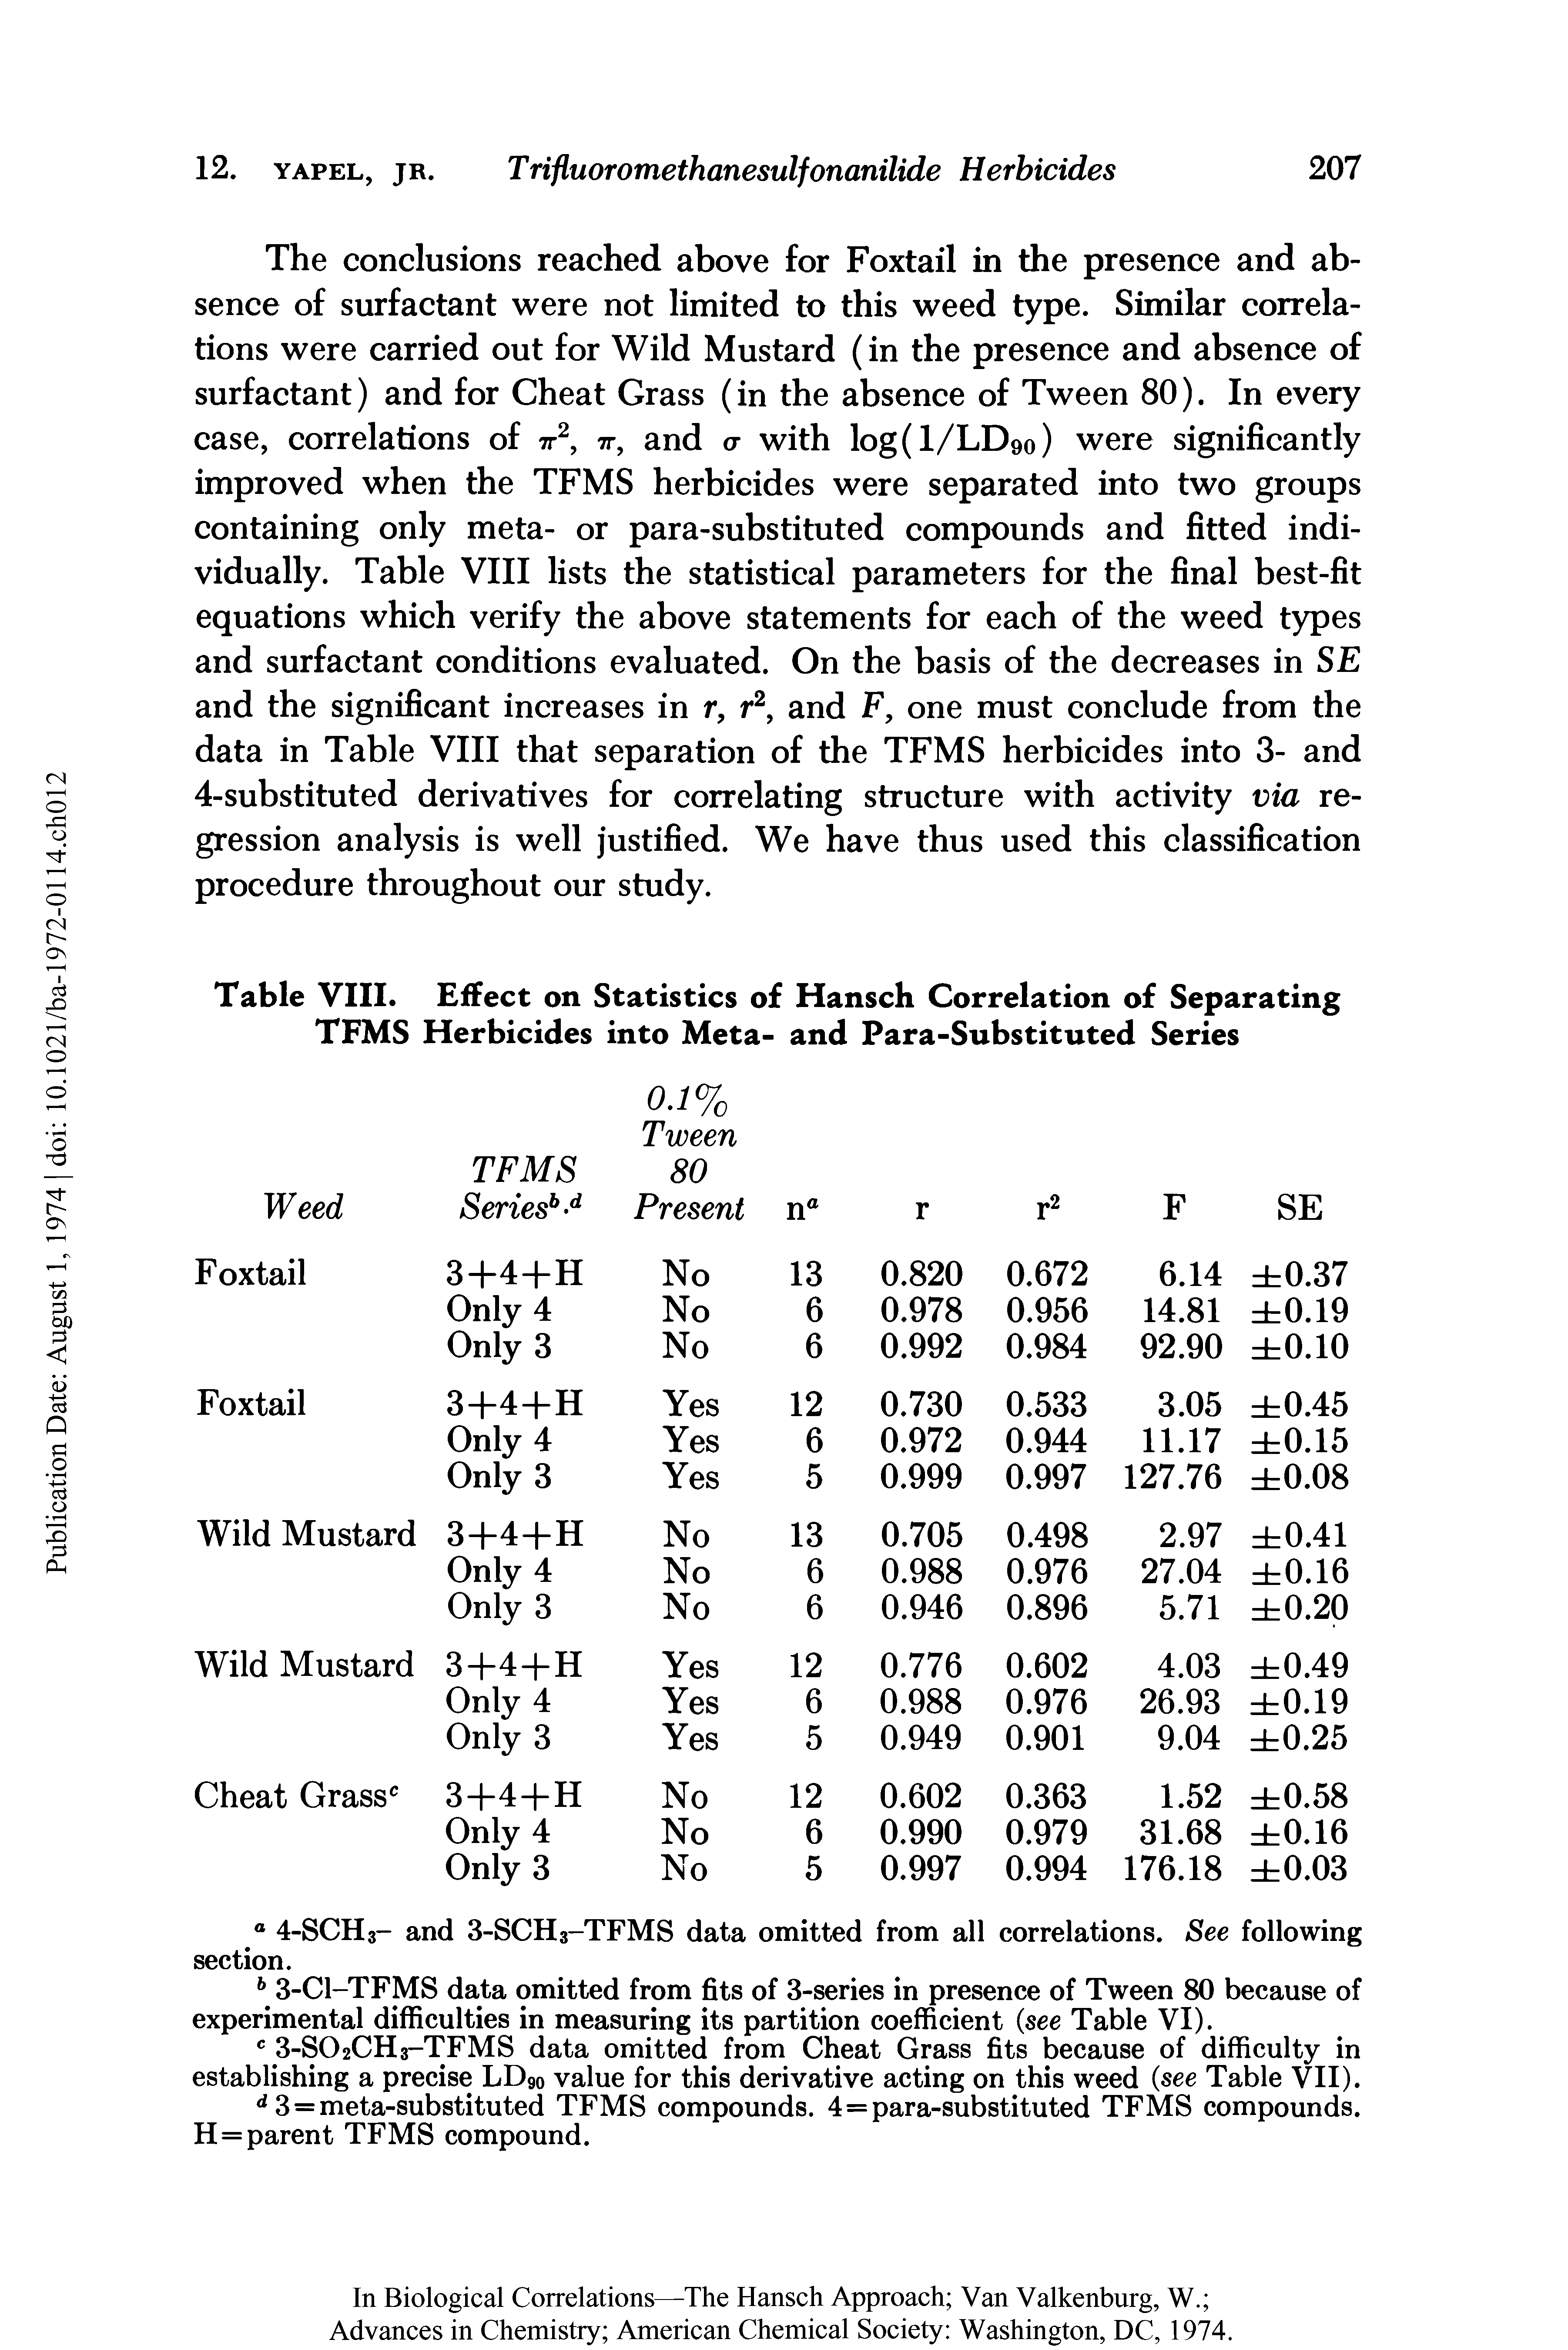 Table VIII. Effect on Statistics of Hansch Correlation of Separating TFMS Herbicides into Meta- and Para-Substituted Series...